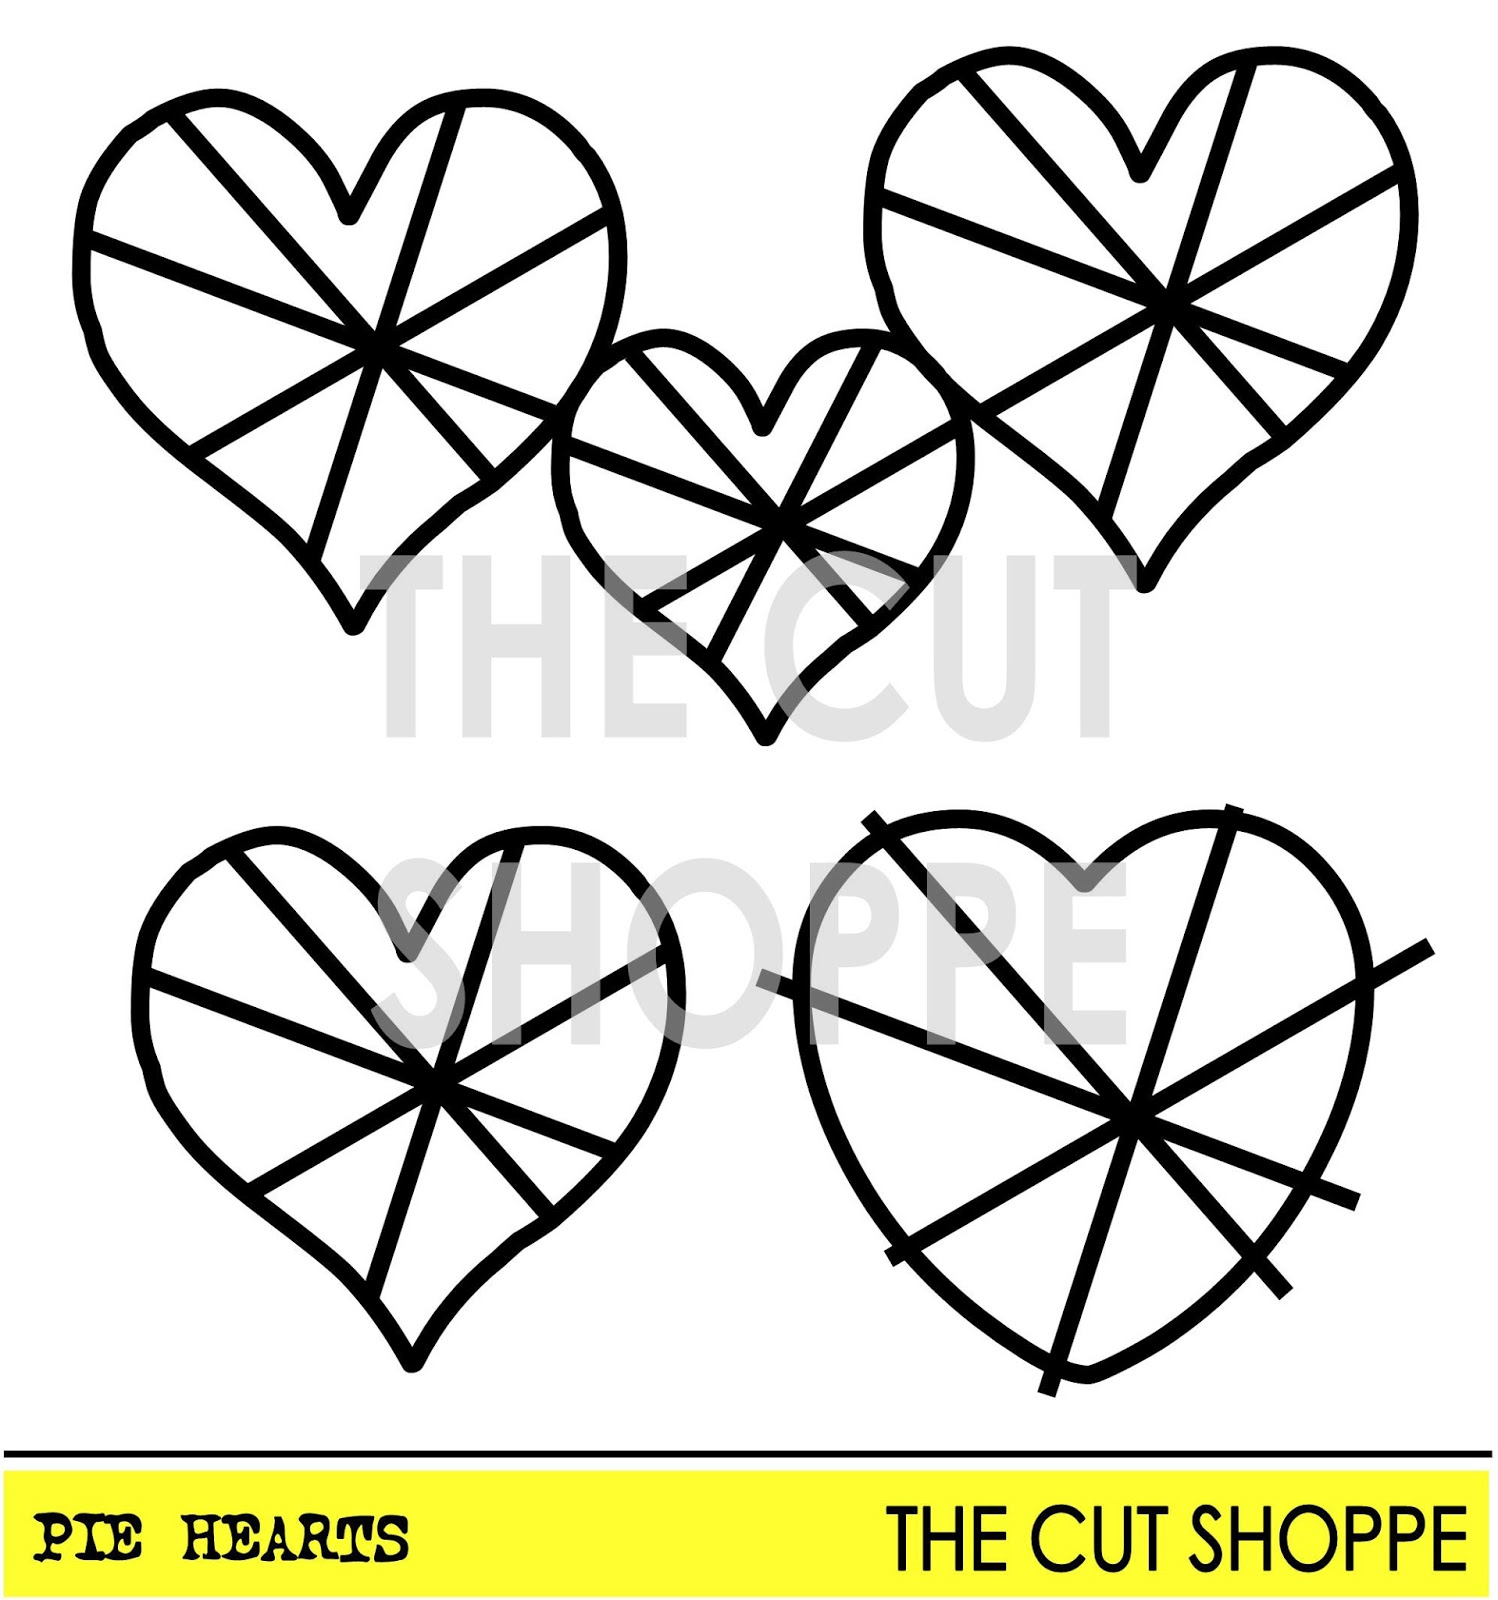 https://www.etsy.com/listing/193530389/the-pie-hearts-cut-file-consists-of?ref=shop_home_active_11